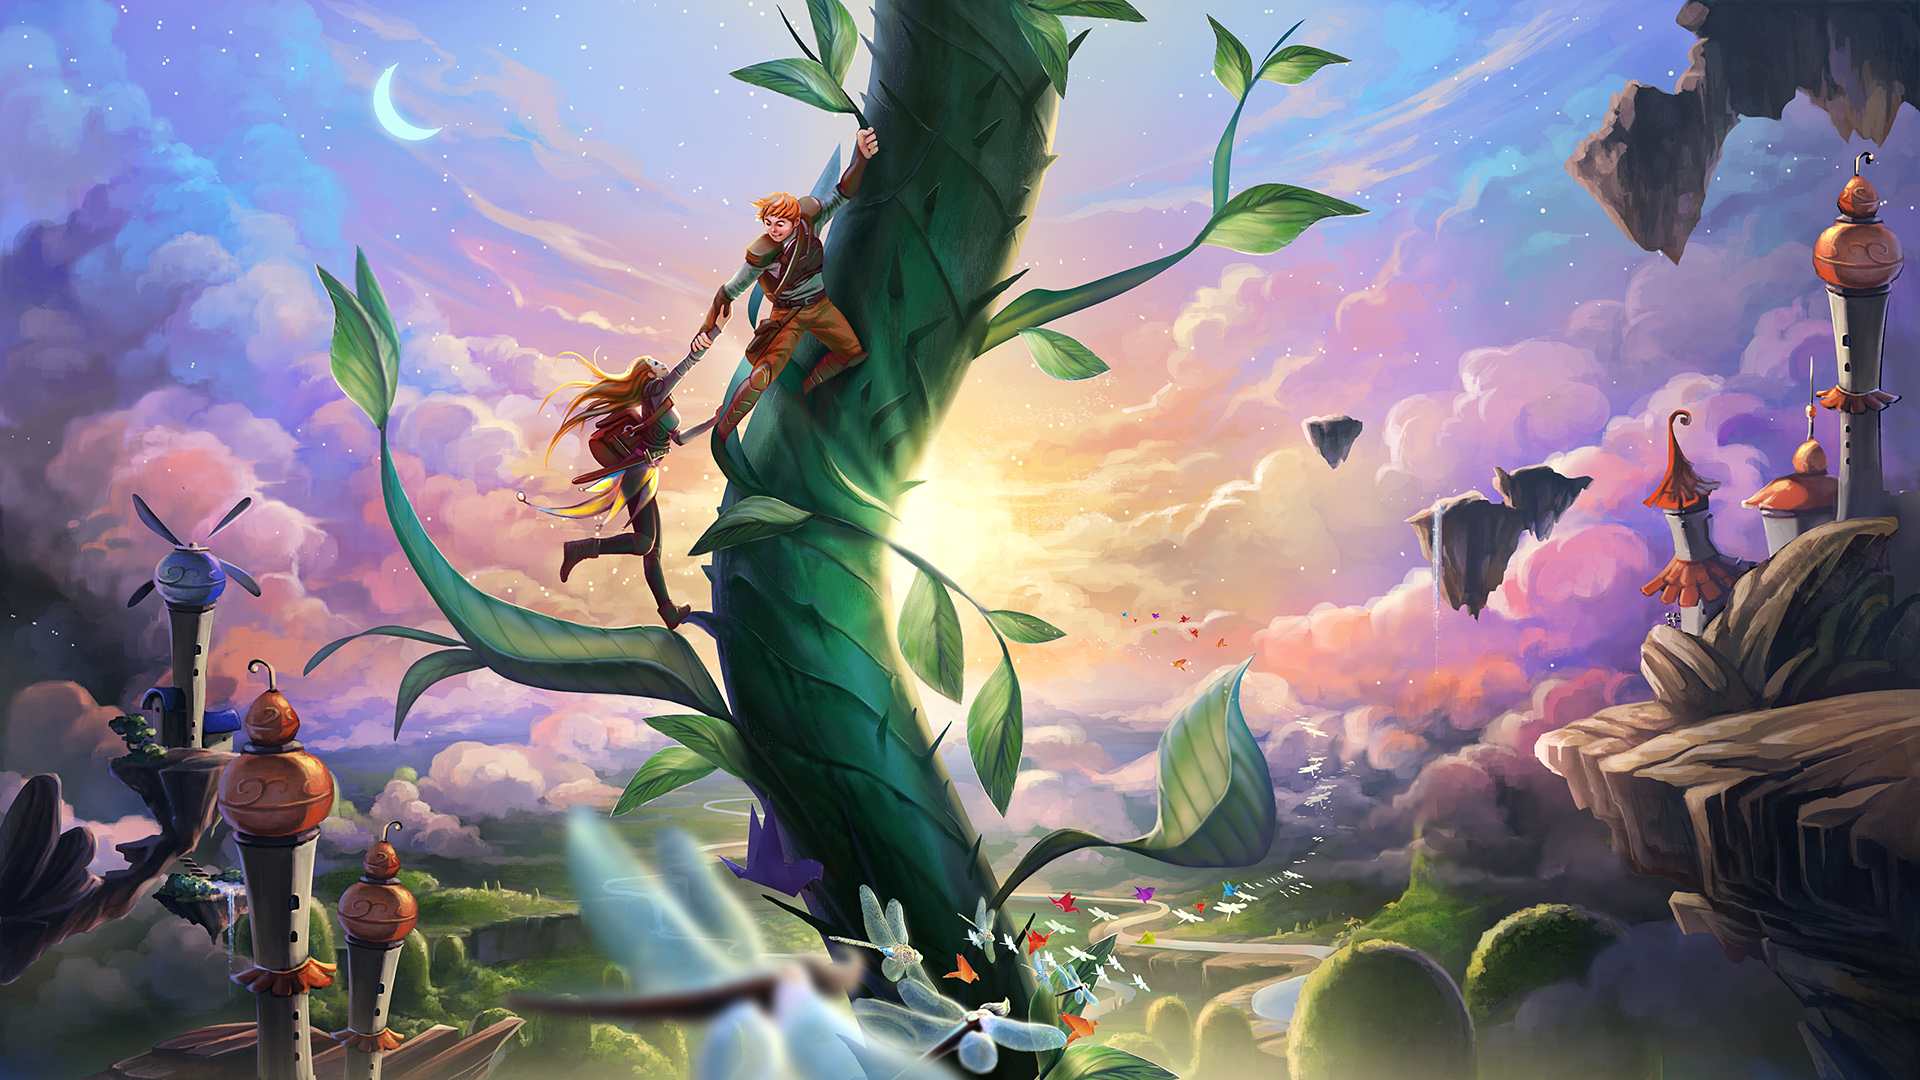 artistic, fantasy, fairy tale, jack and the beanstalk